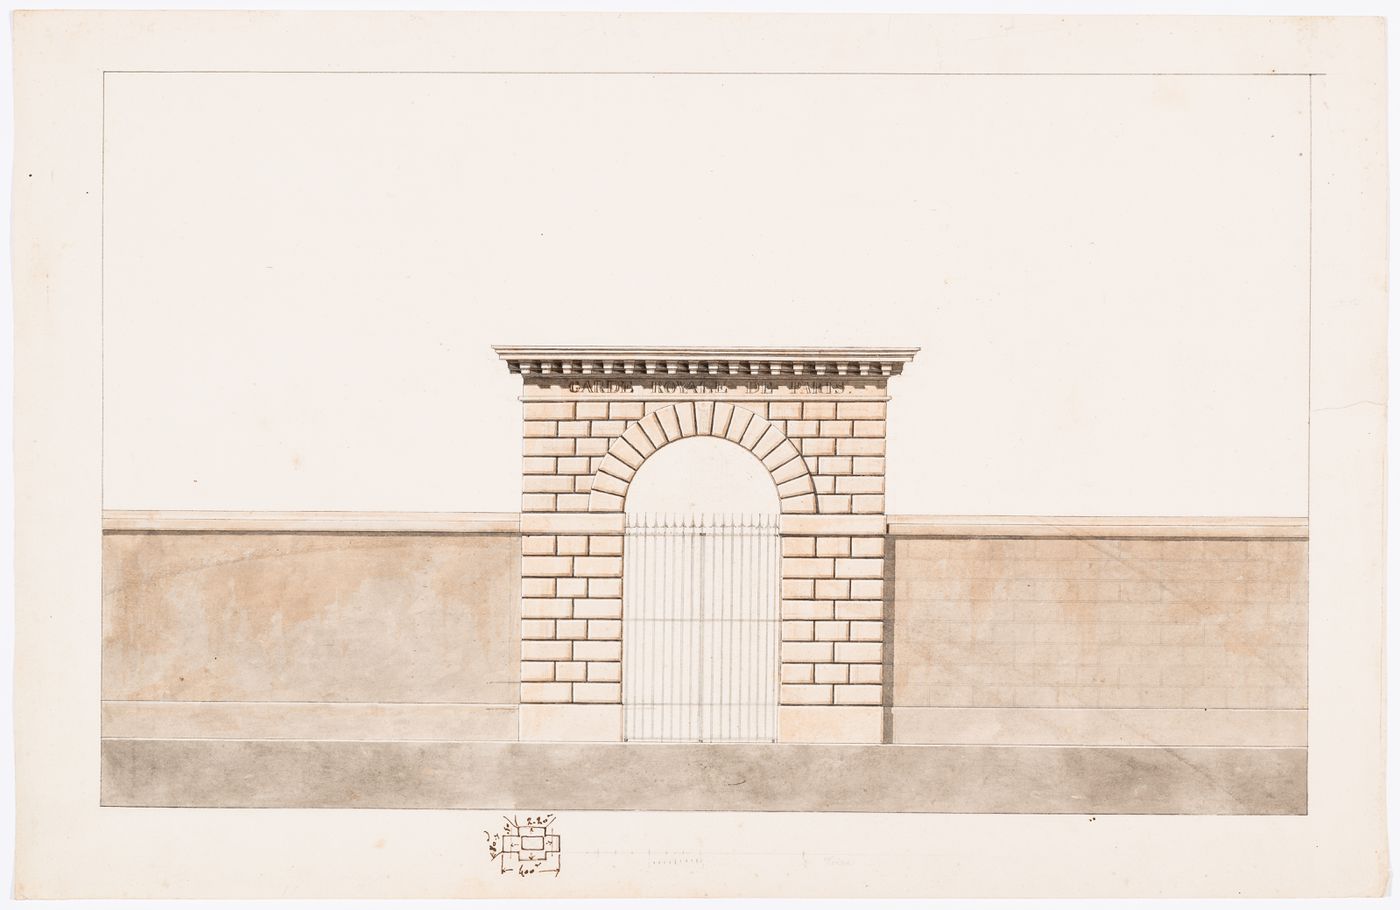 Project for alterations to the Caserne des Minimes, rue des Minimes [?]: Elevation for an entrance archway